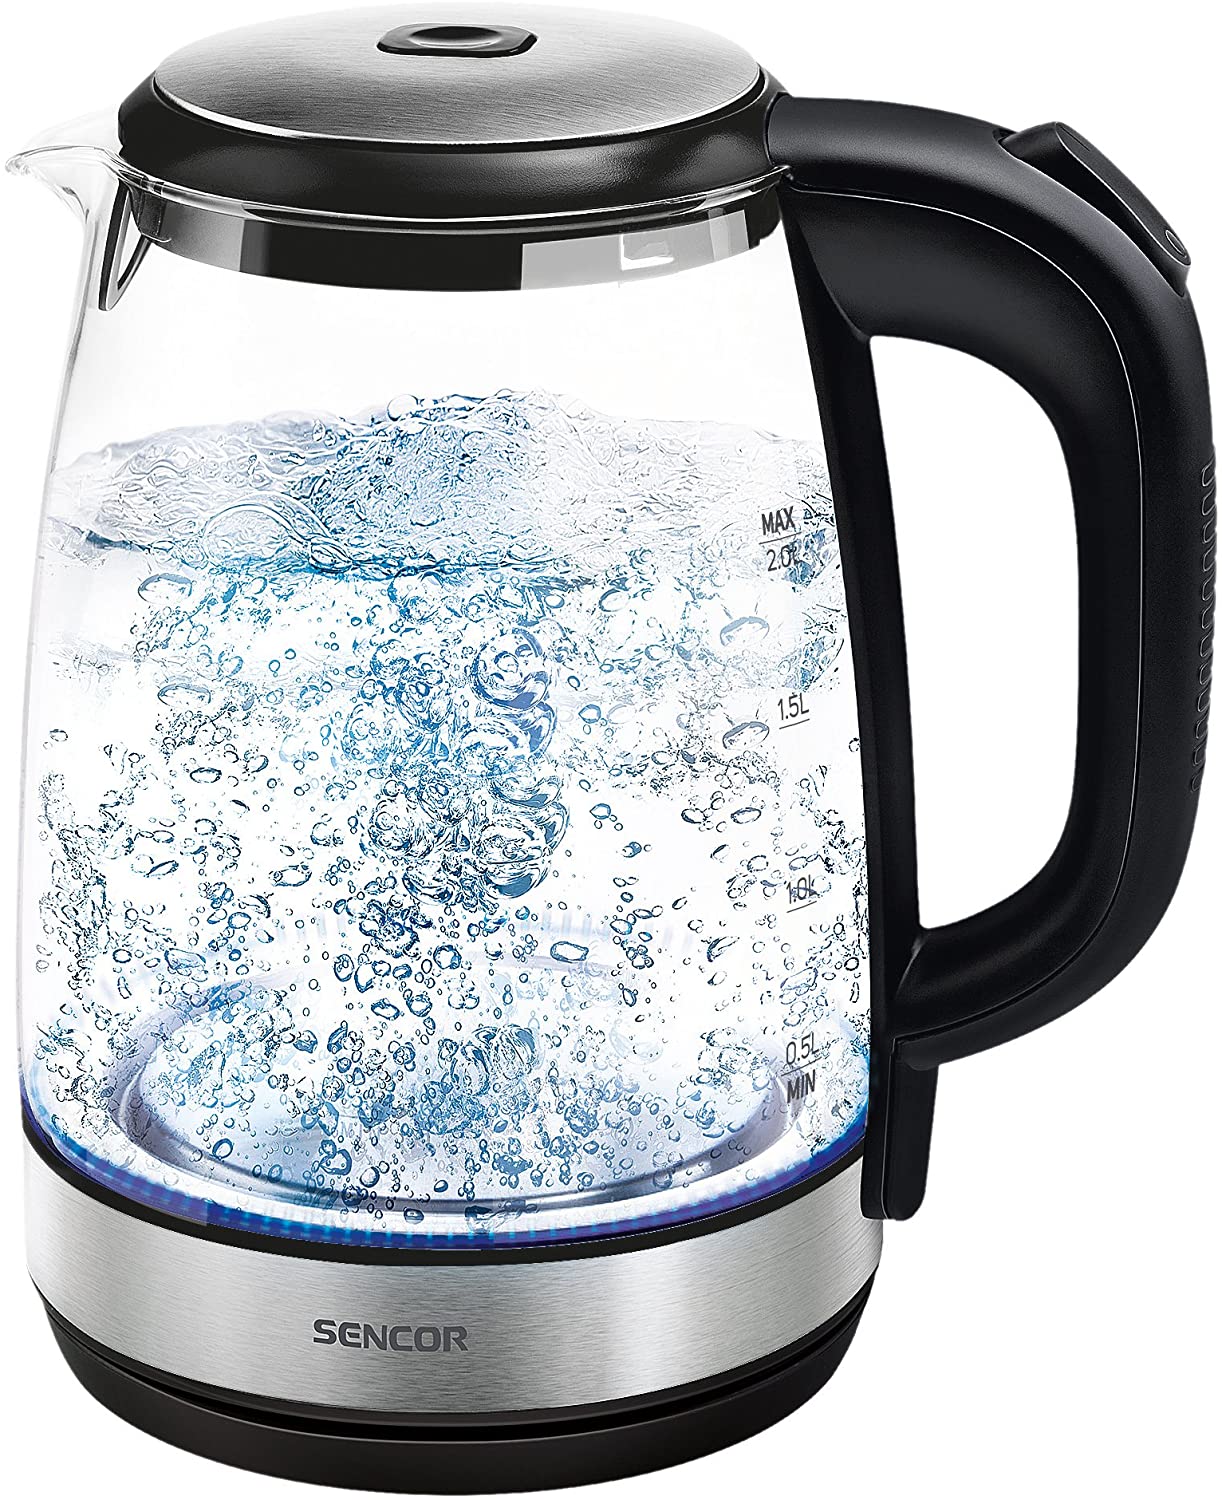 Sencor SWK 2080BK Glass Electric Kettle, Capacity 2.0 L, The Watermark on both sides